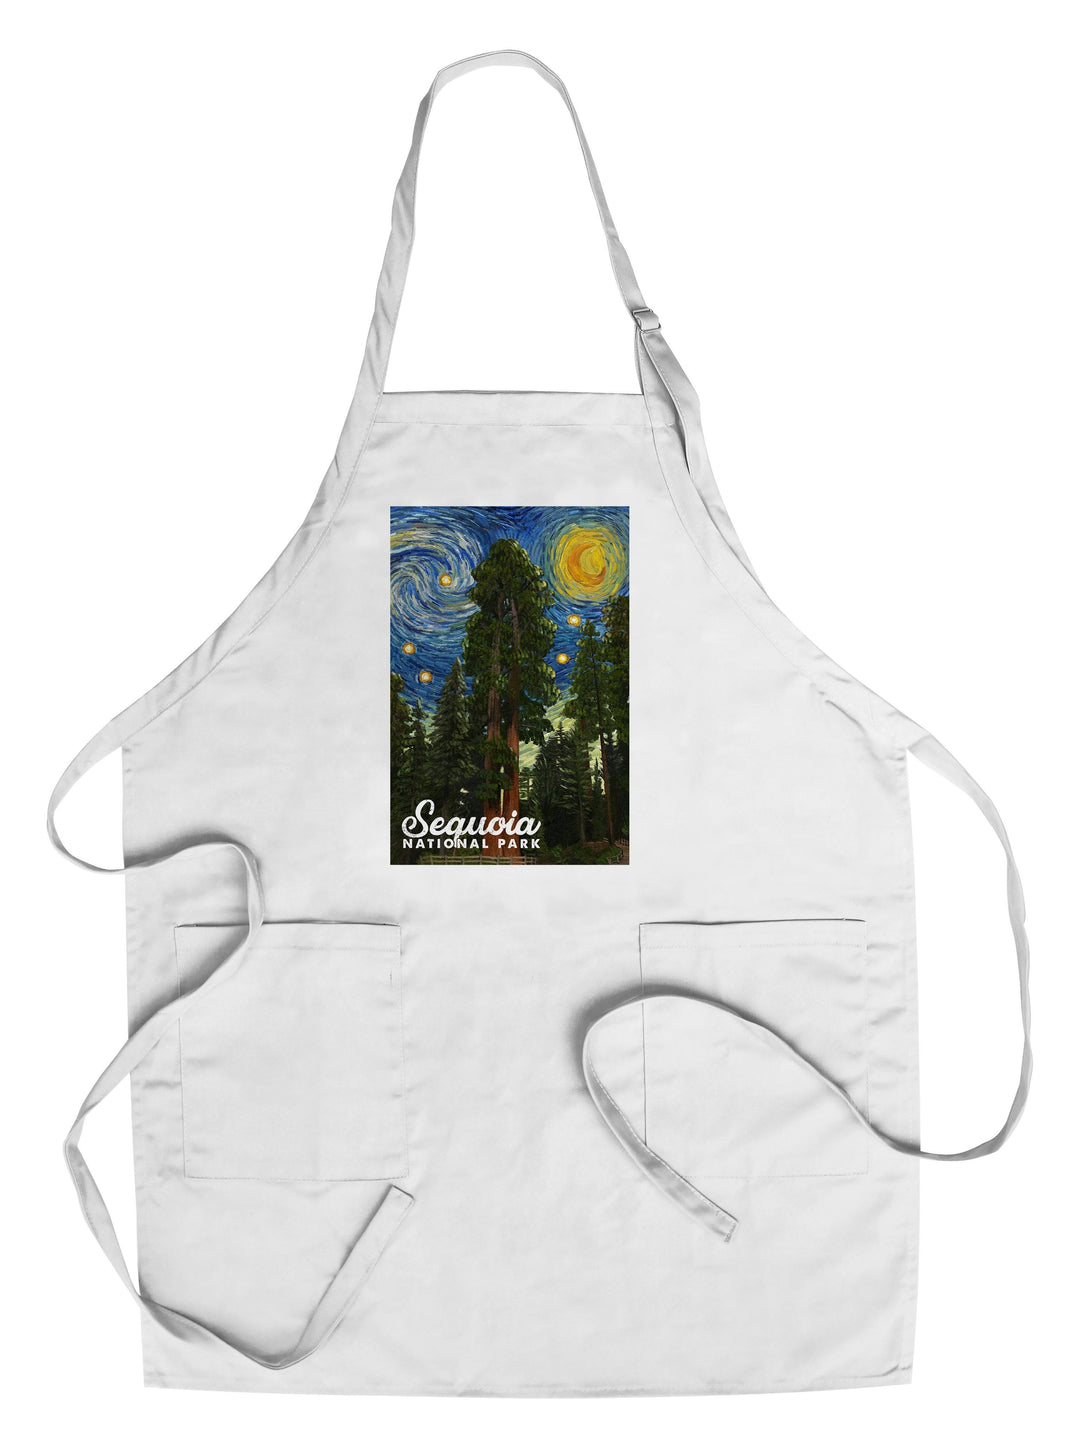 Sequoia National Park, California, Starry Night National Park Series, Lantern Press Artwork, Towels and Aprons Kitchen Lantern Press Chef's Apron 